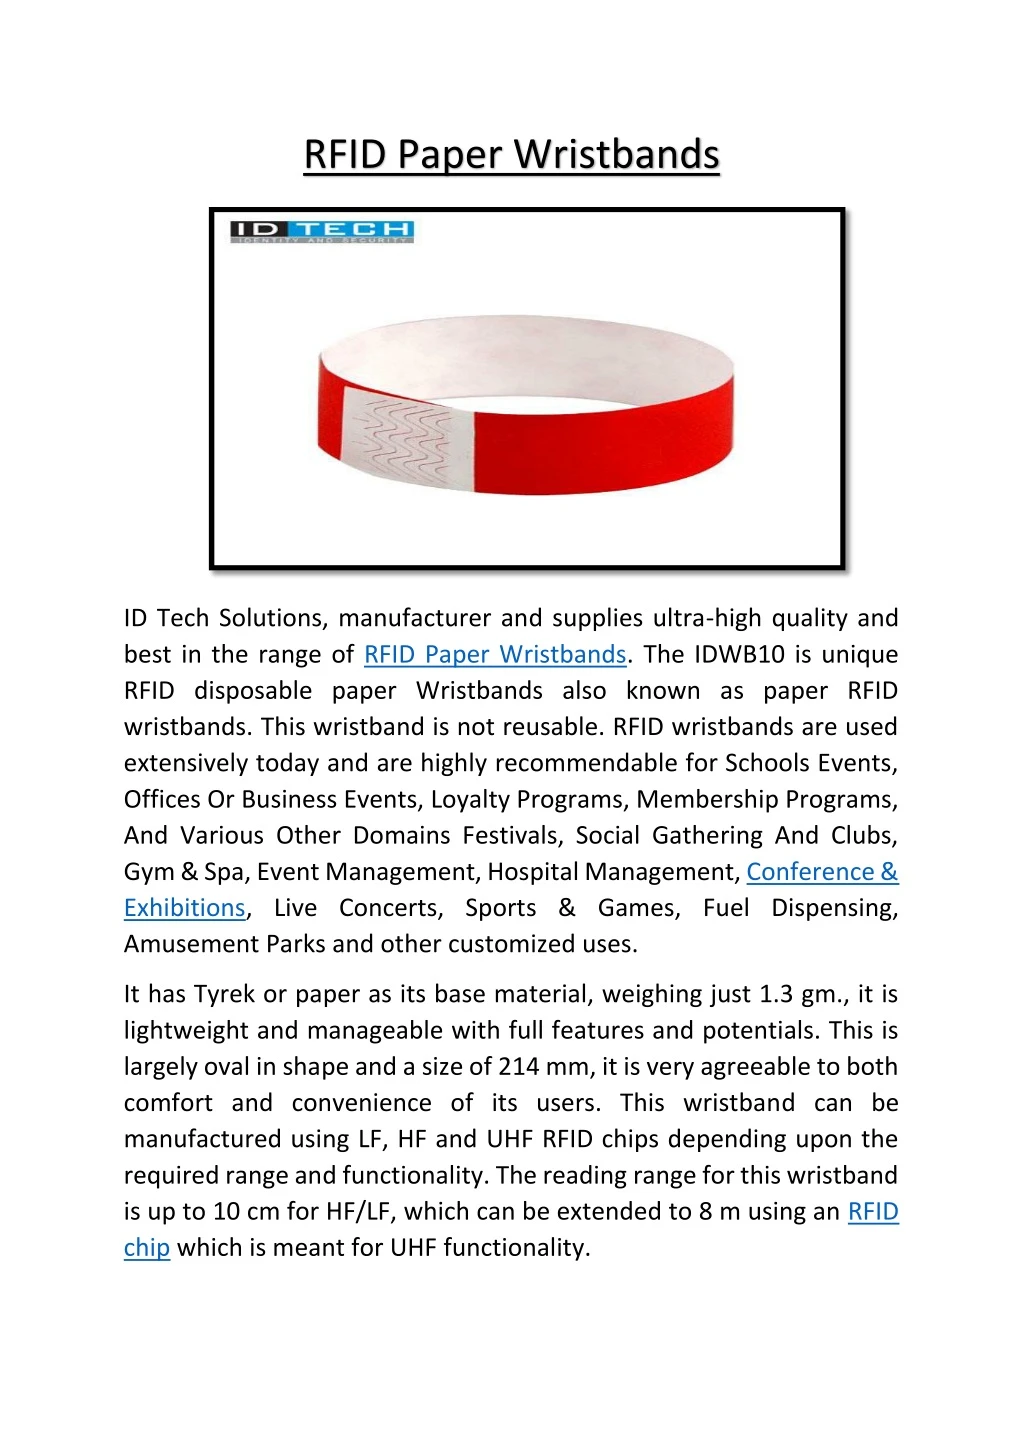 rfid paper wristbands